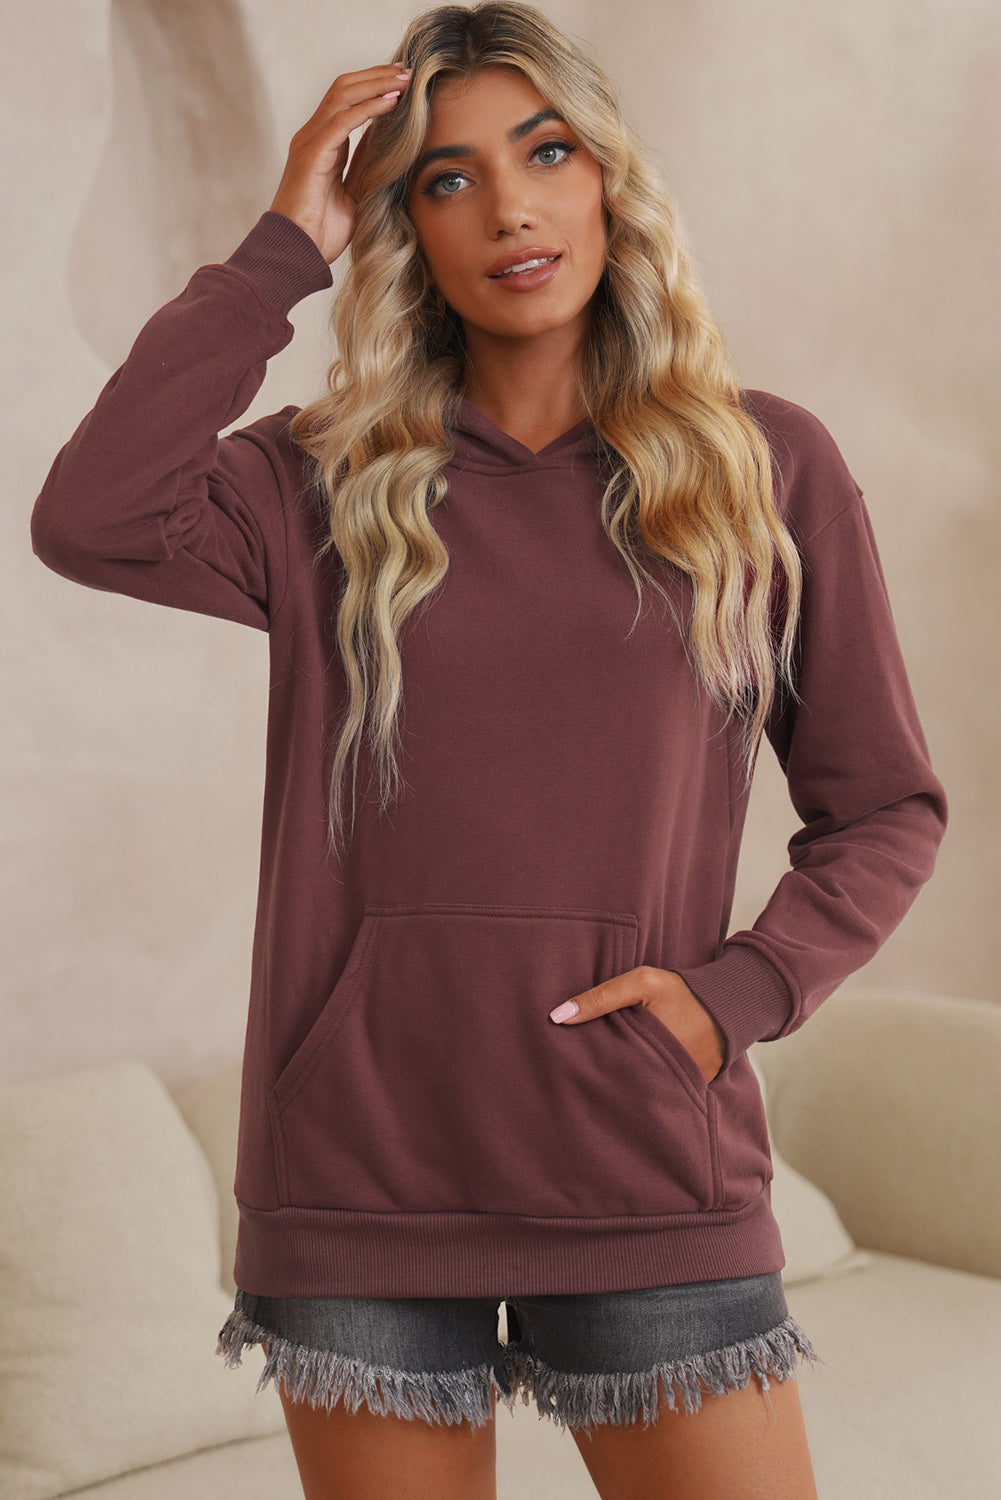 Dropped Shoulder Kangaroo Pocket Hoodie - Red / S - Women’s Clothing & Accessories - Shirts & Tops - 5 - 2024